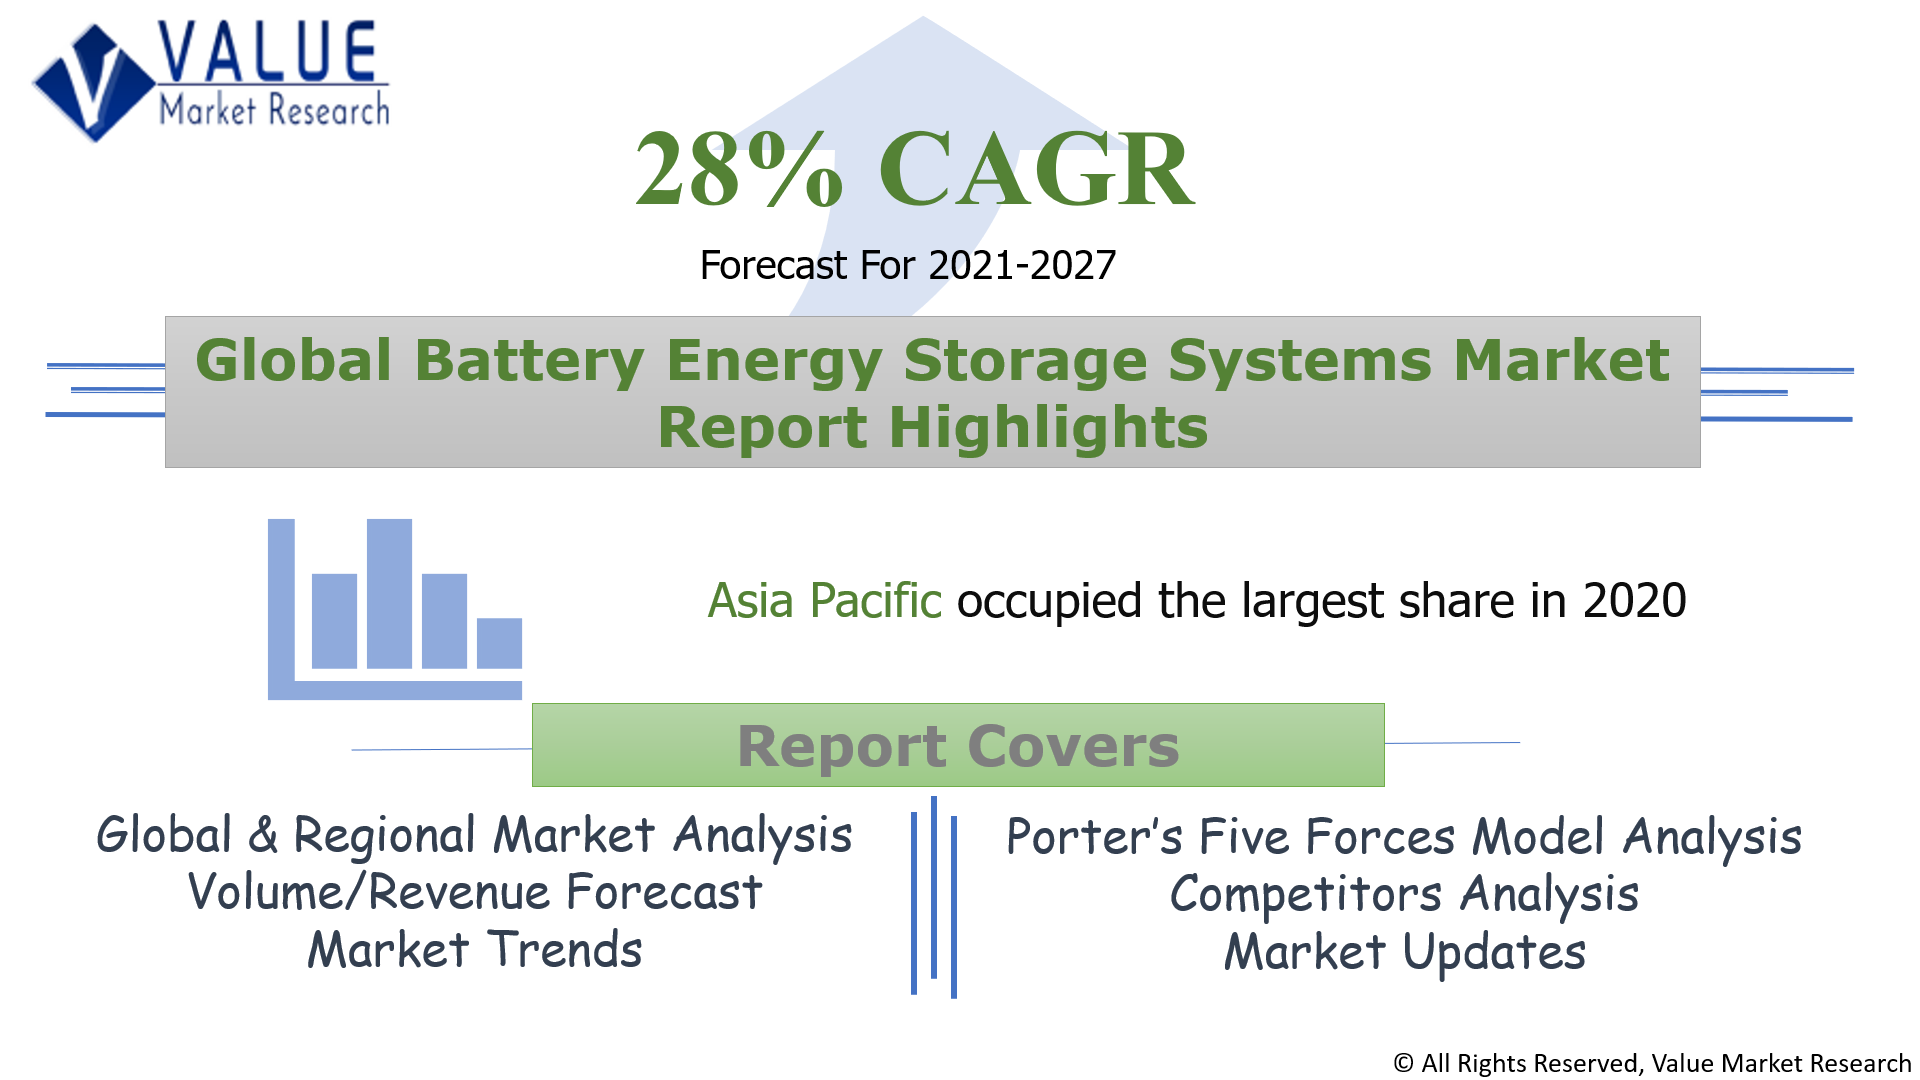 Global Battery Energy Storage Systems Market Share